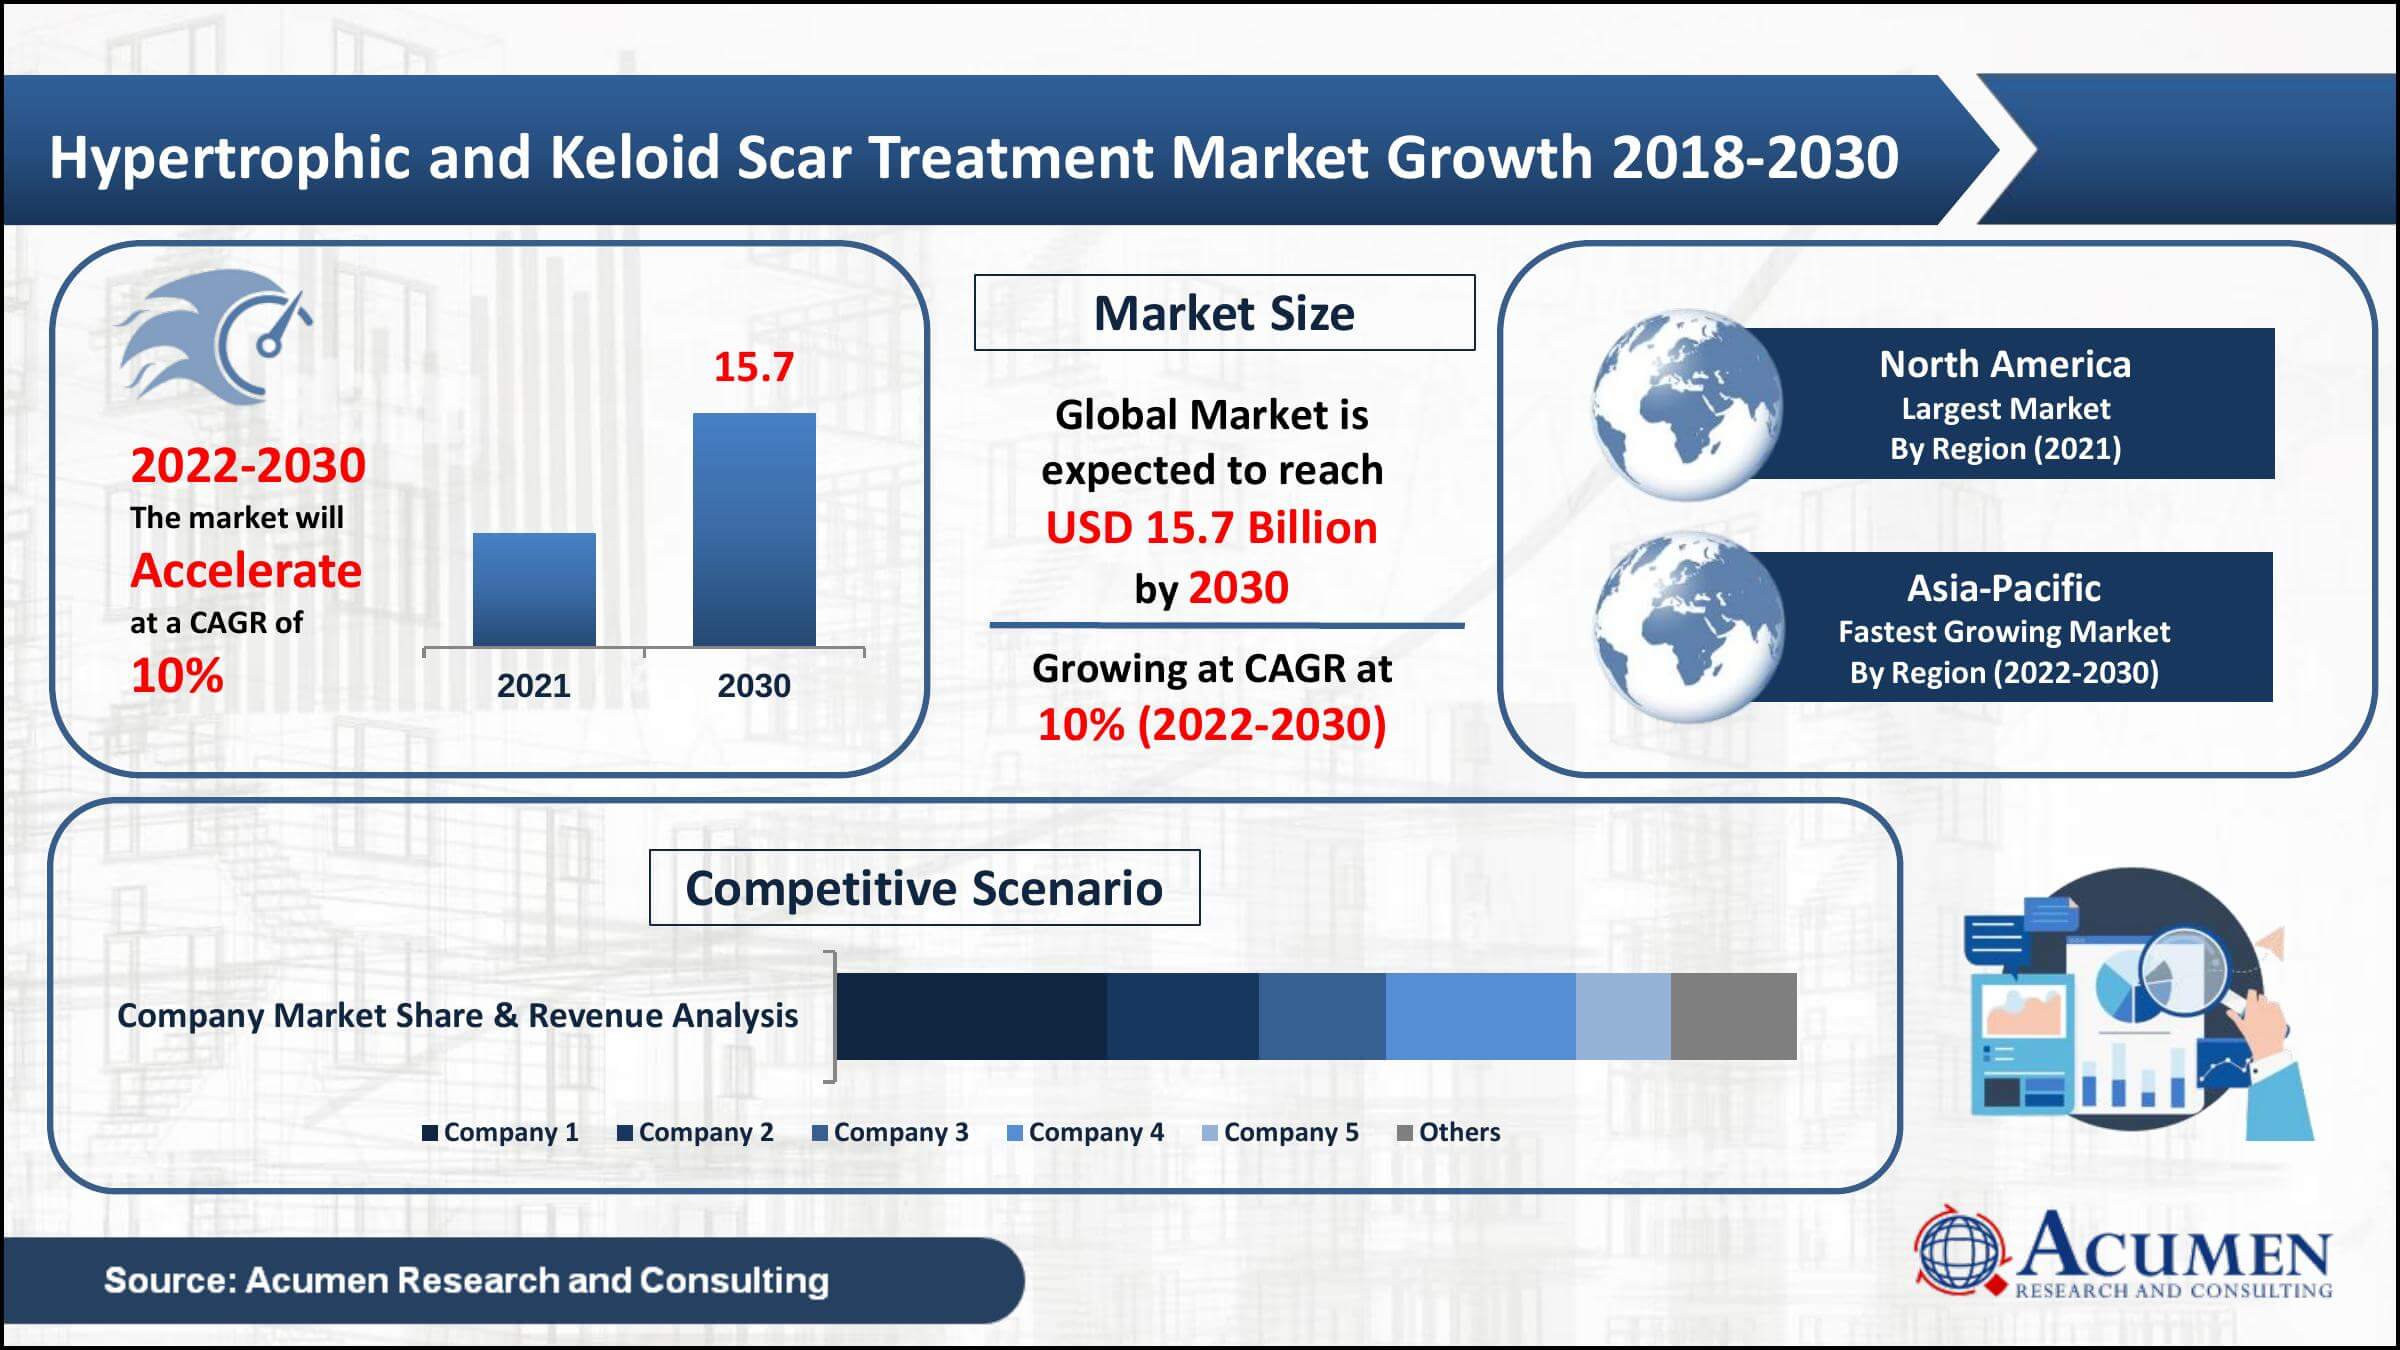 Global hypertrophic and keloid scar treatment market value was worth USD 6.8 Billion in 2021, with a 10% CAGR from 2022 to 2030